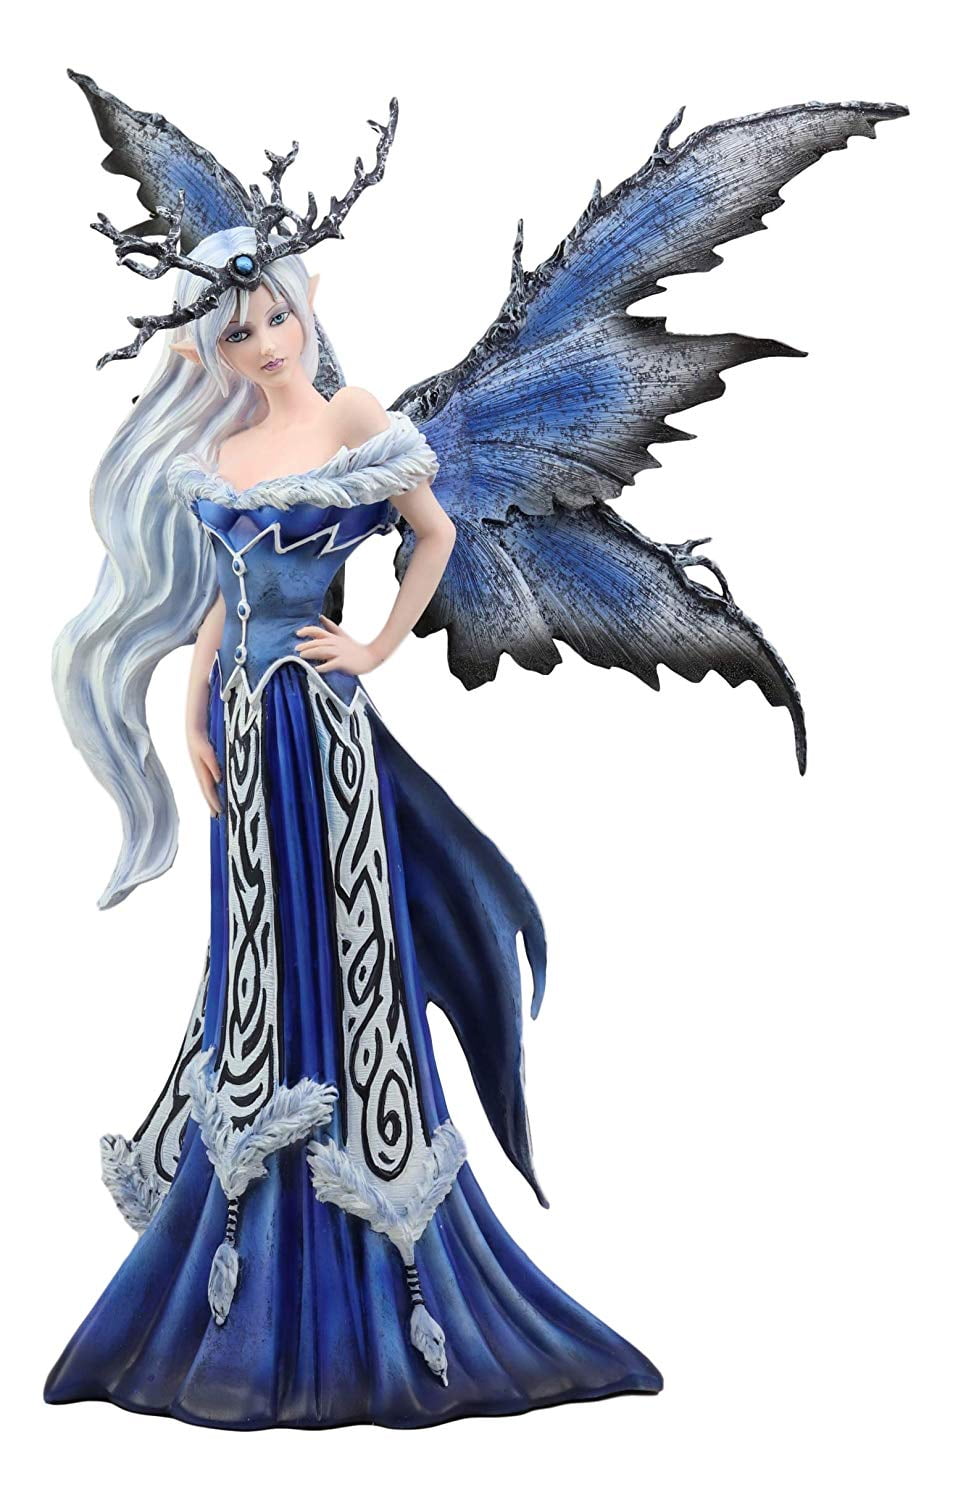 Elemental Ice Goddess Blue Gothic Fairy with Dragon Hatchling Figure Home Decor